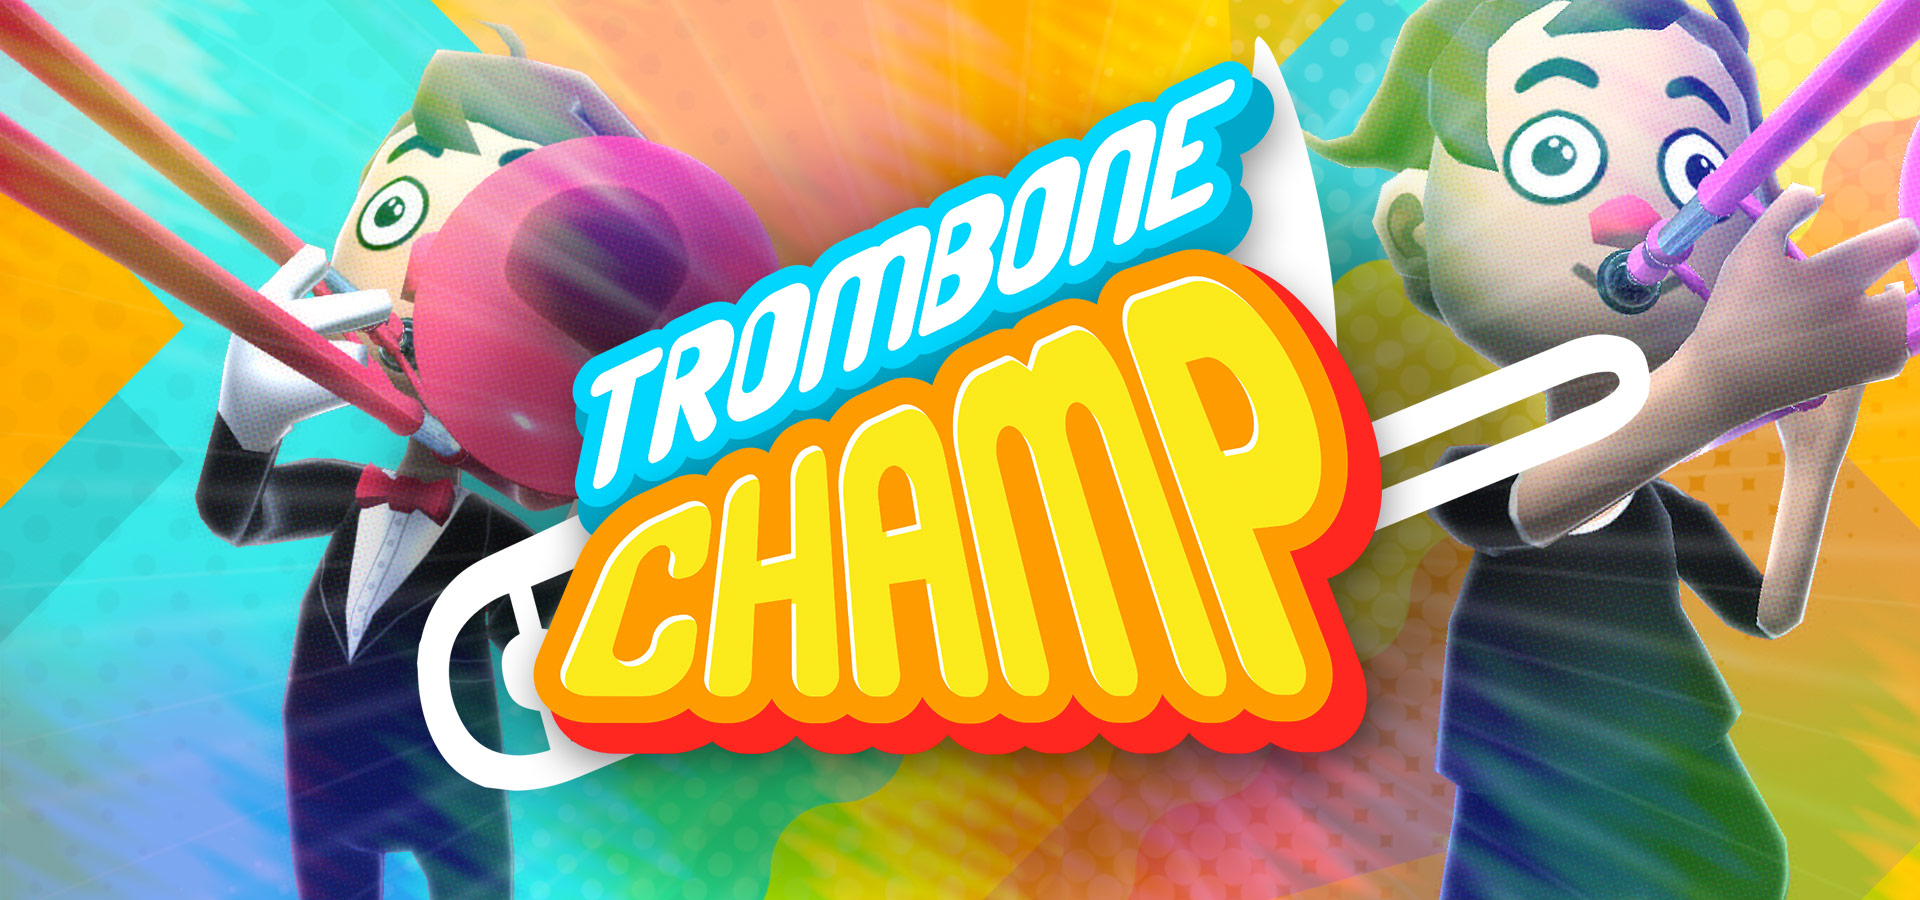 Trombone Champ hero image. Two trombone players on a colorful background with the logo in the foreground.